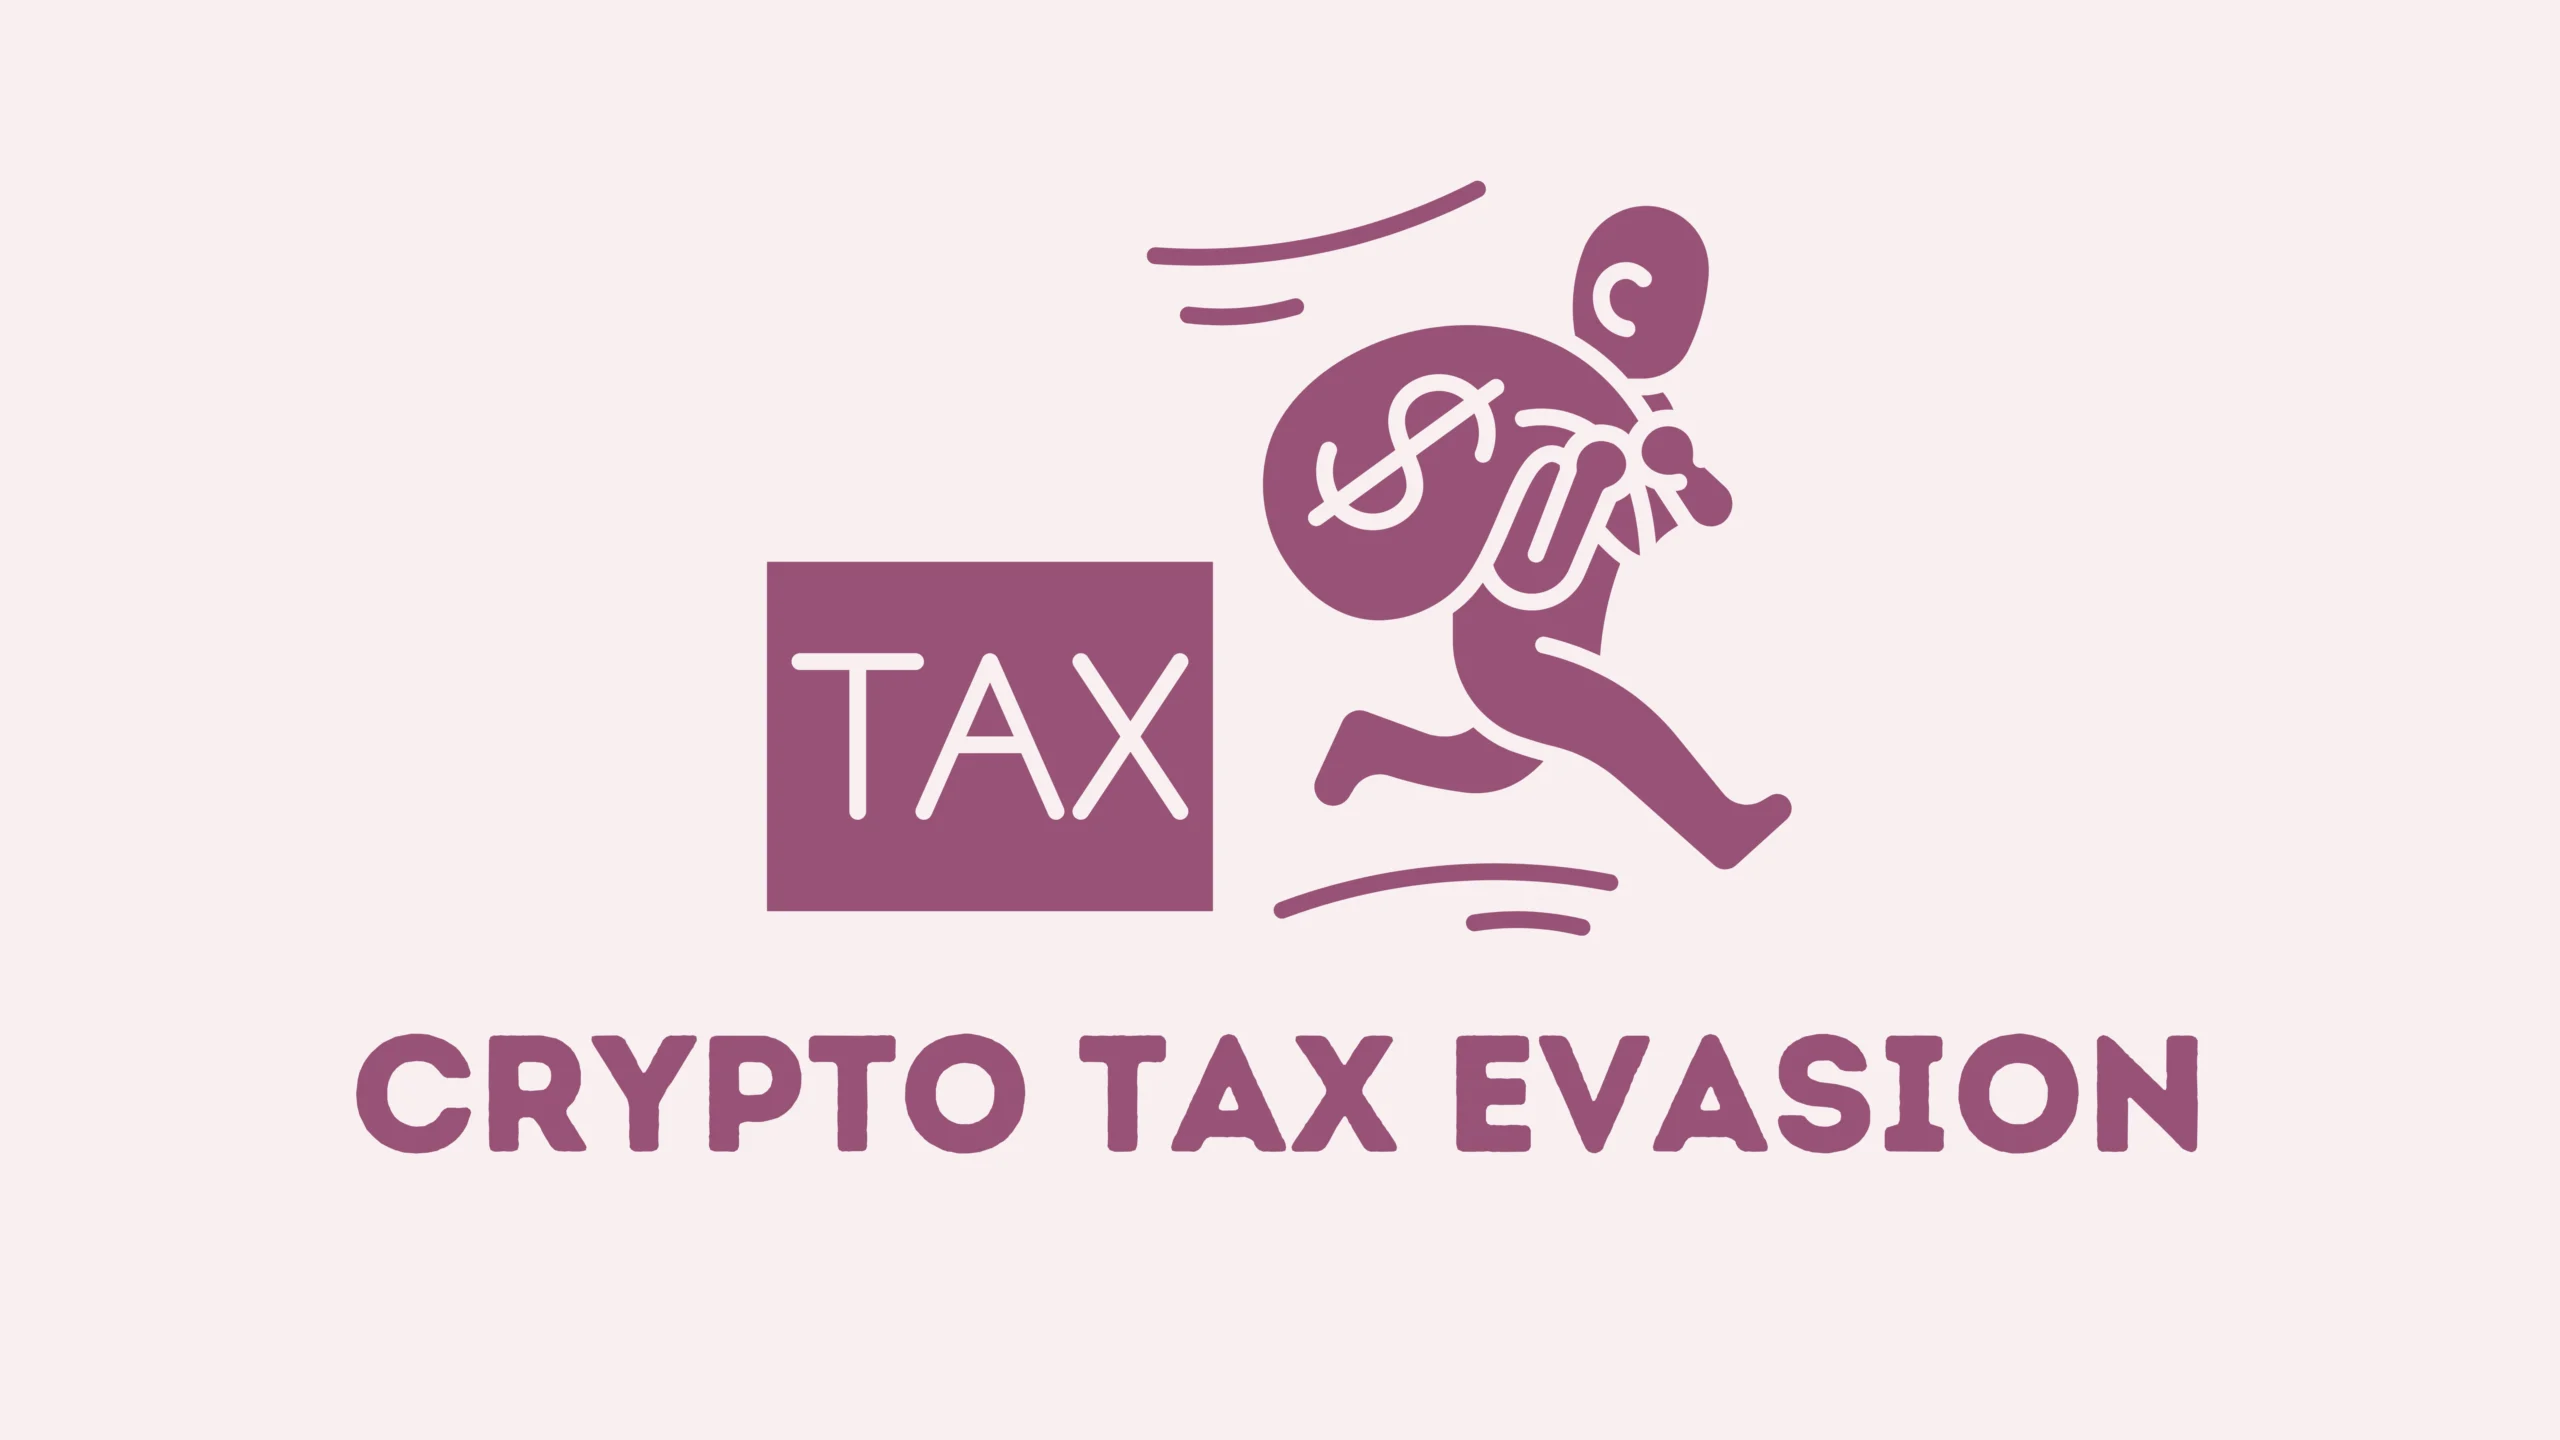 Top Penalties for Crypto Tax Evasion in India